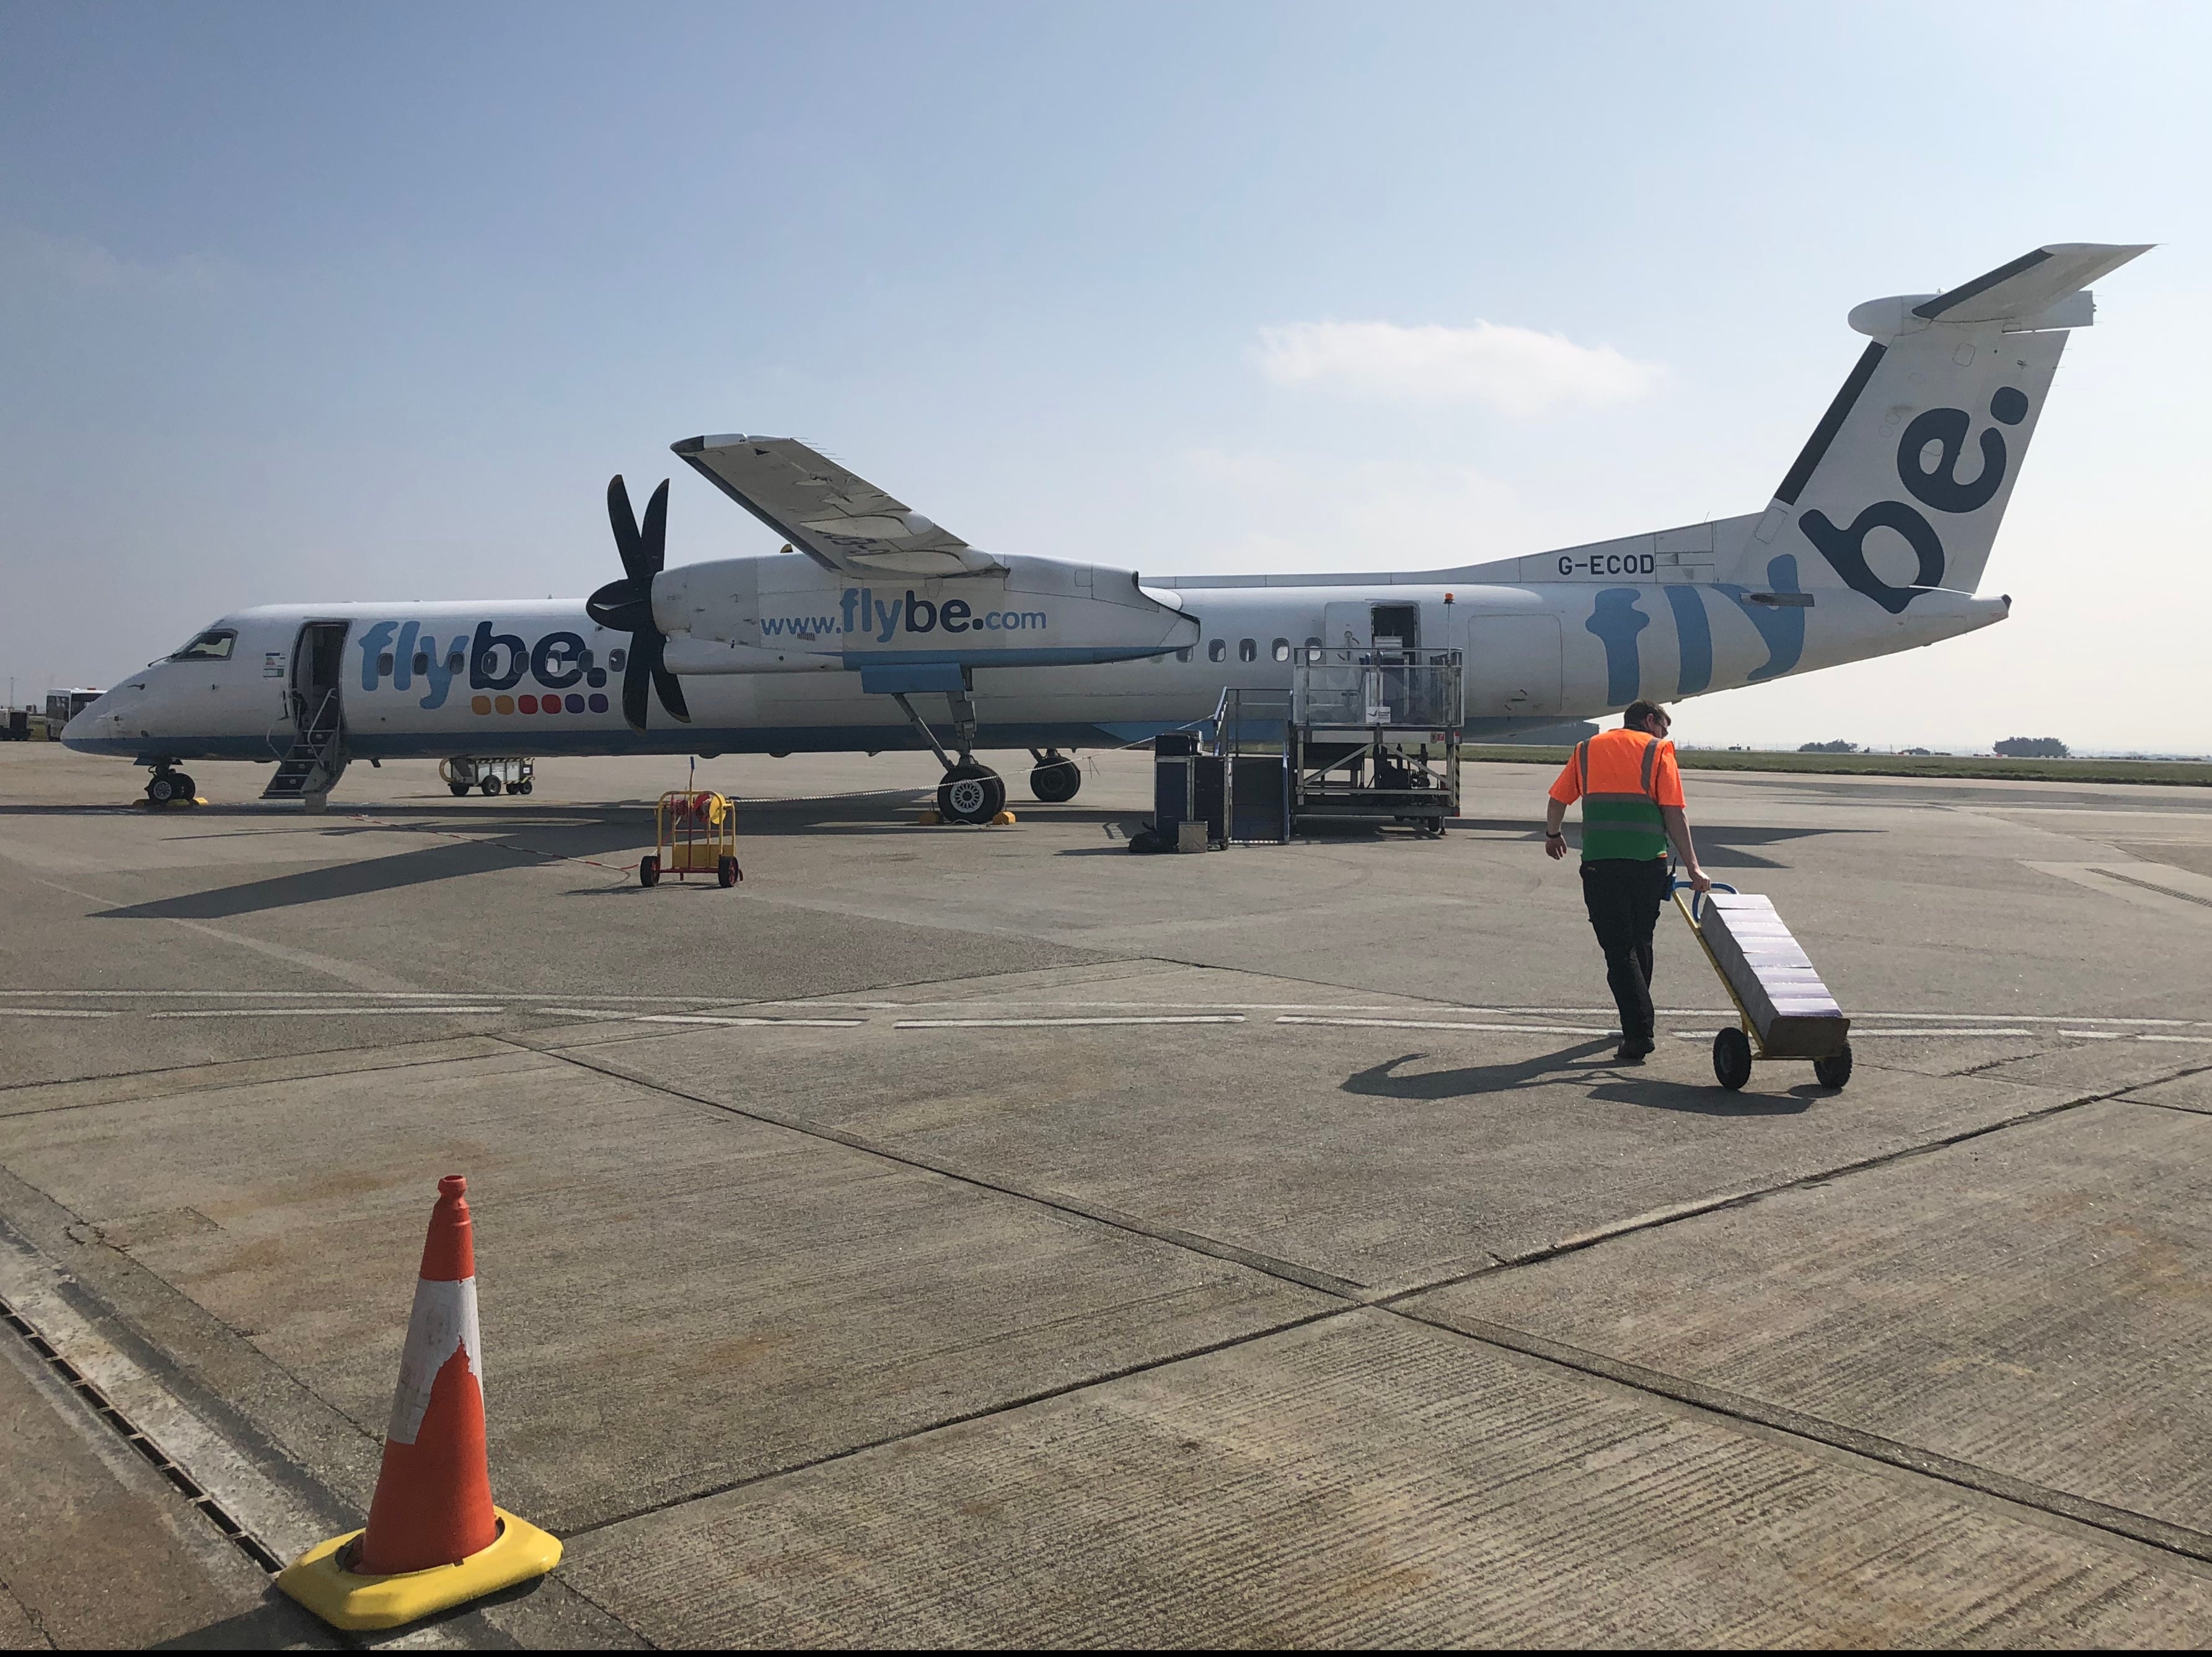 Distant dream: a Flybe aircraft at Newquay airport before the airline collapsed